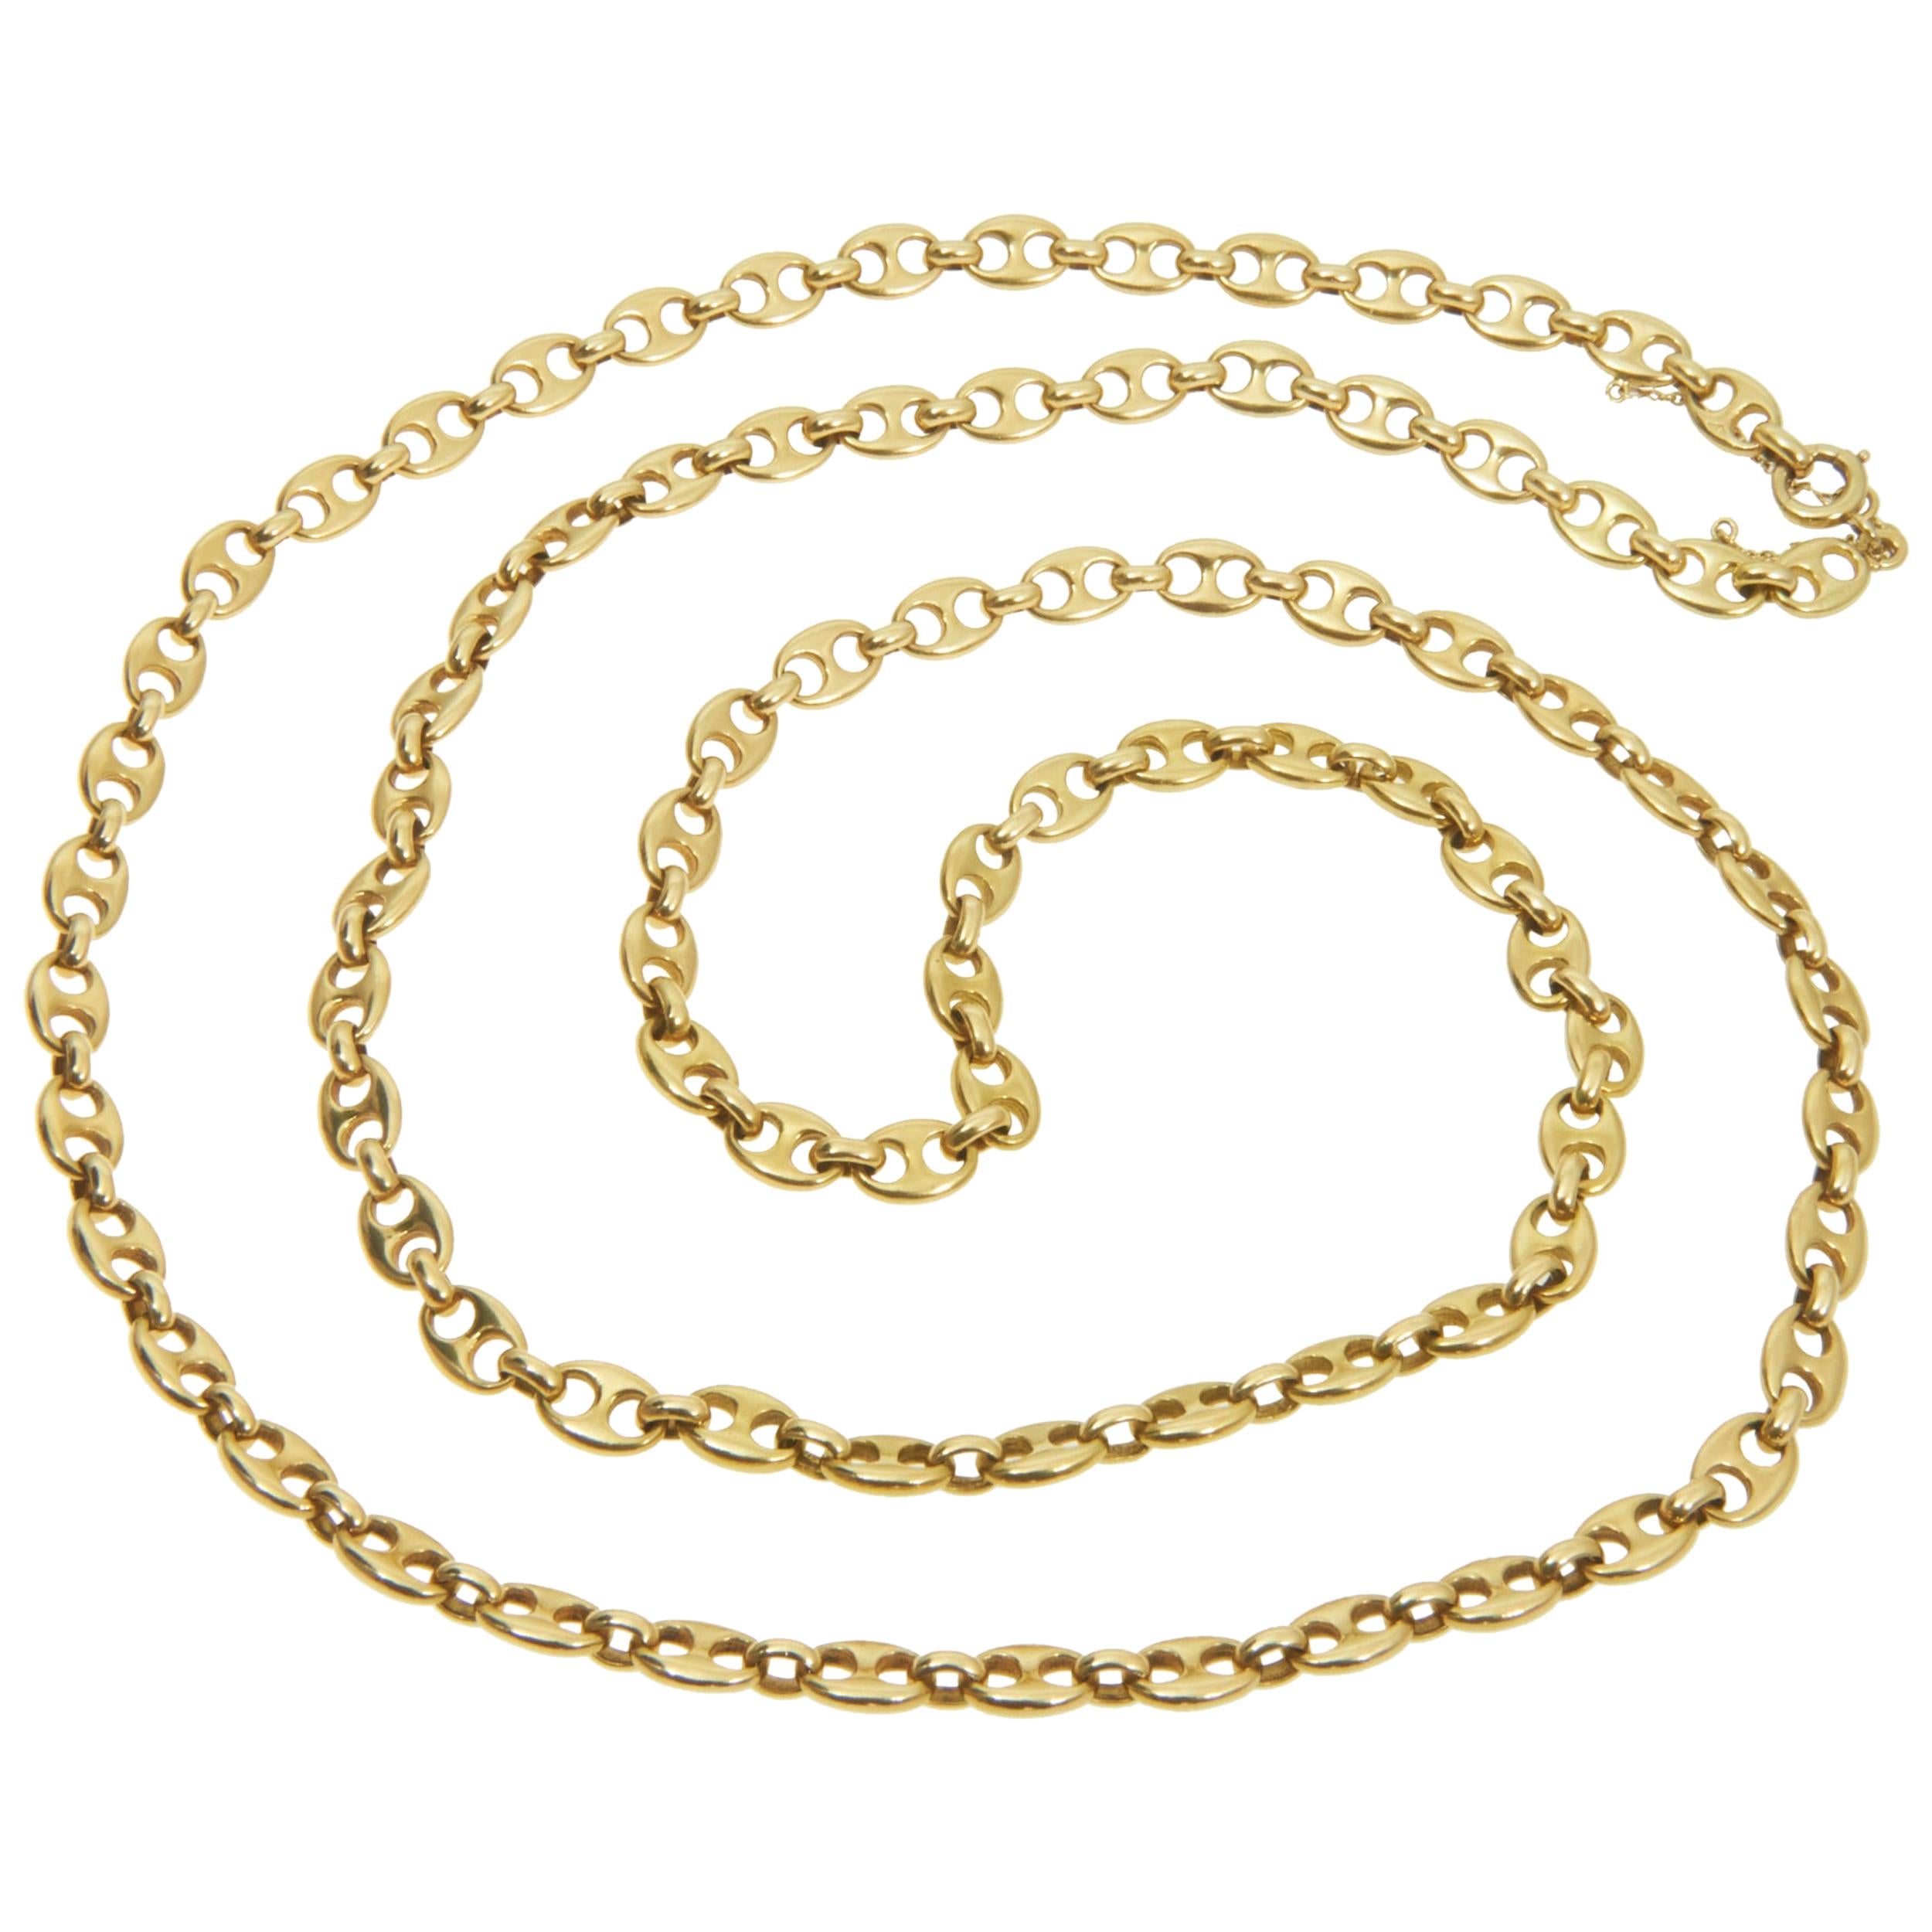 Van Cleef & Arpels Gold Gucci-Style Anchor Link Chain, circa 1975